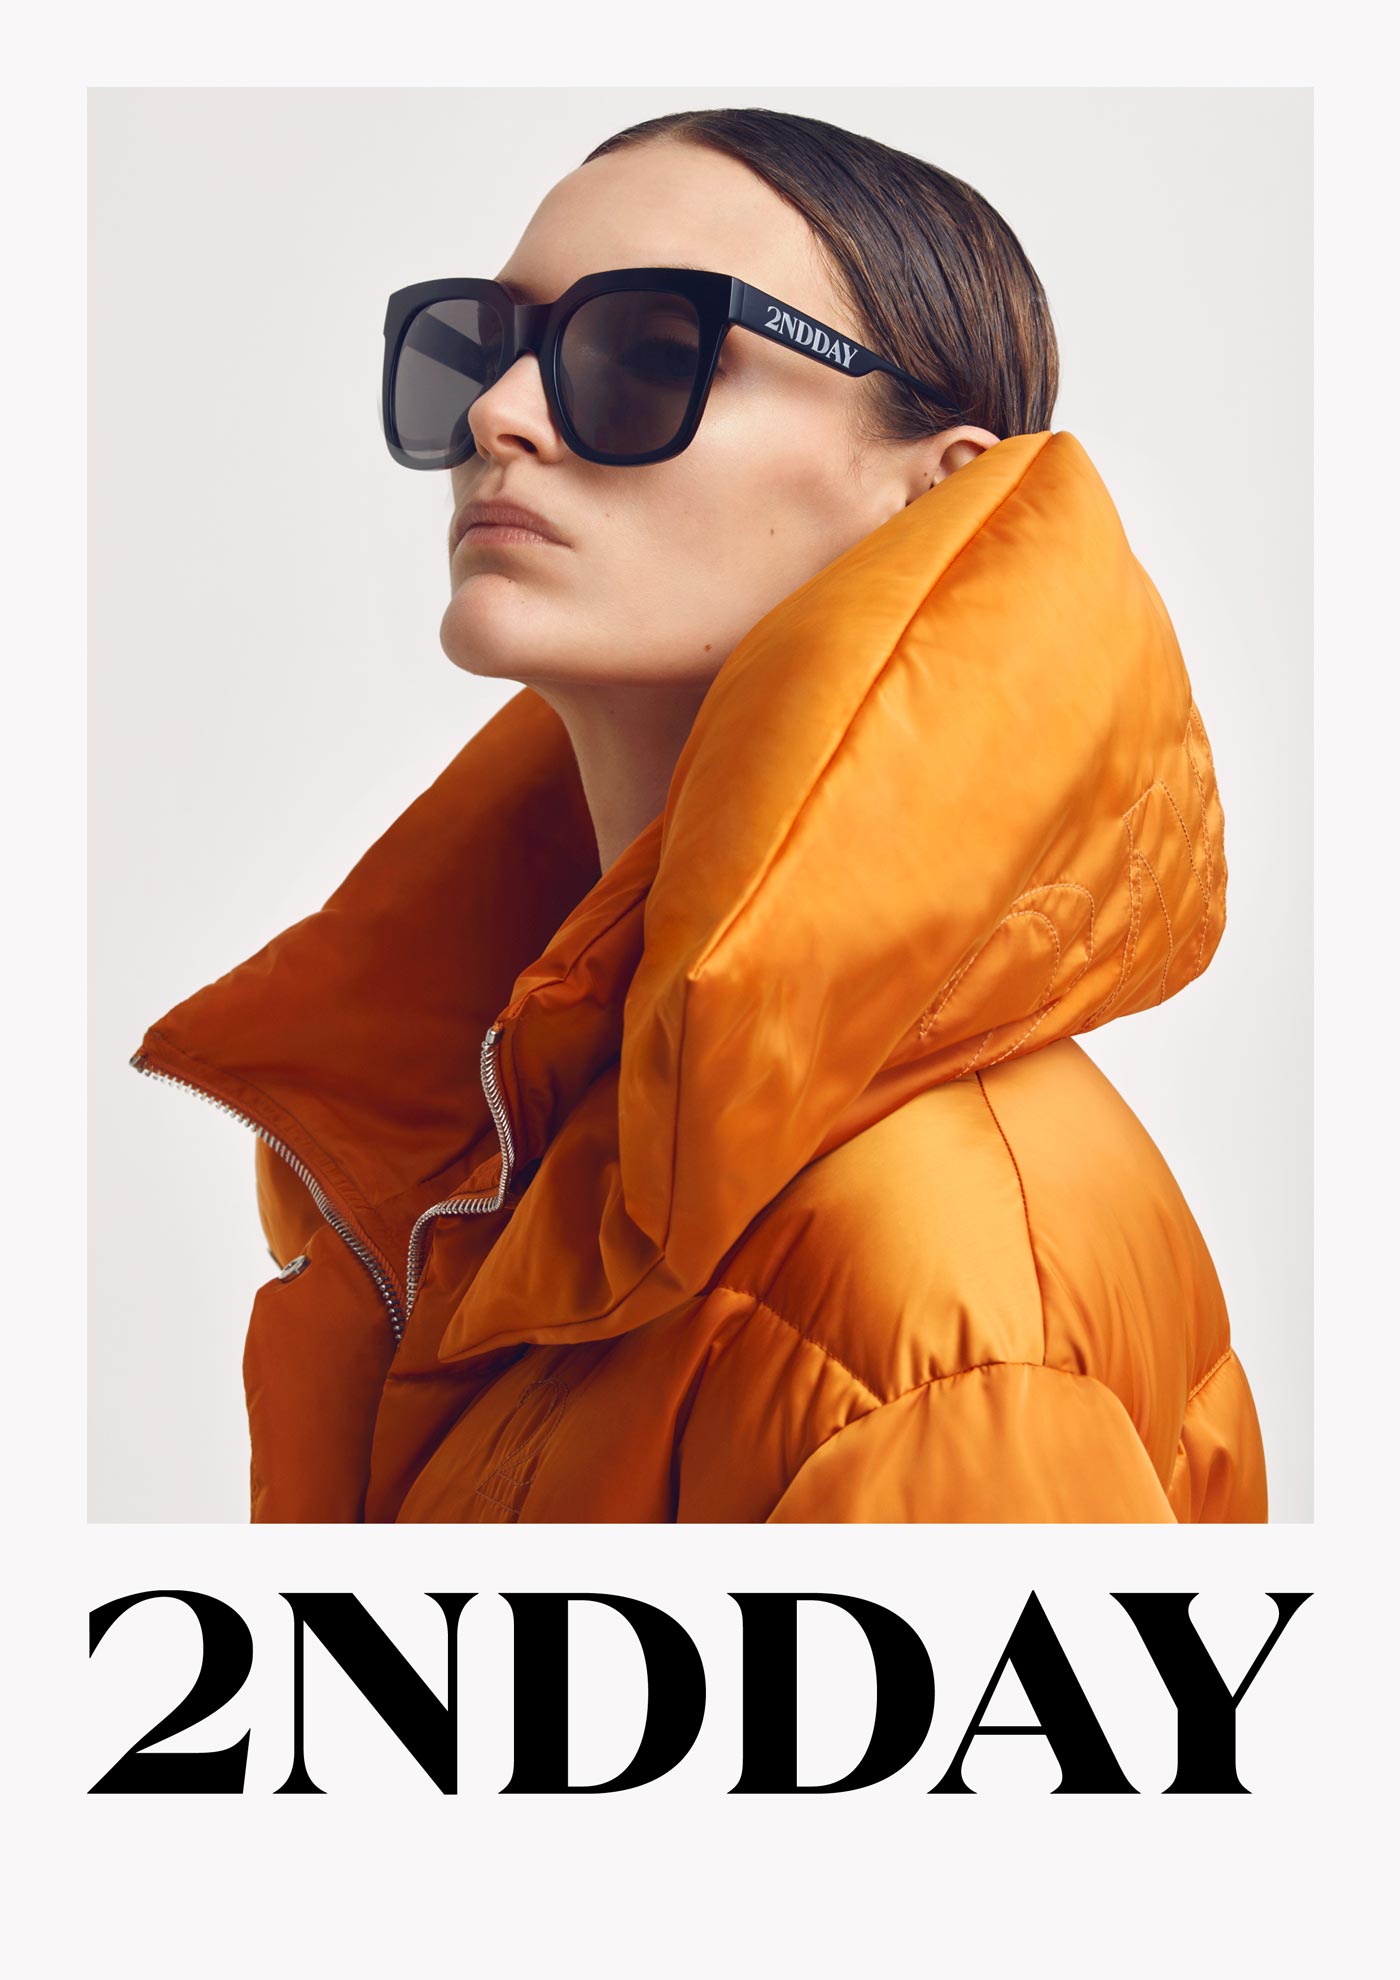 2ndday – Campaign Autumn/Winter 2017